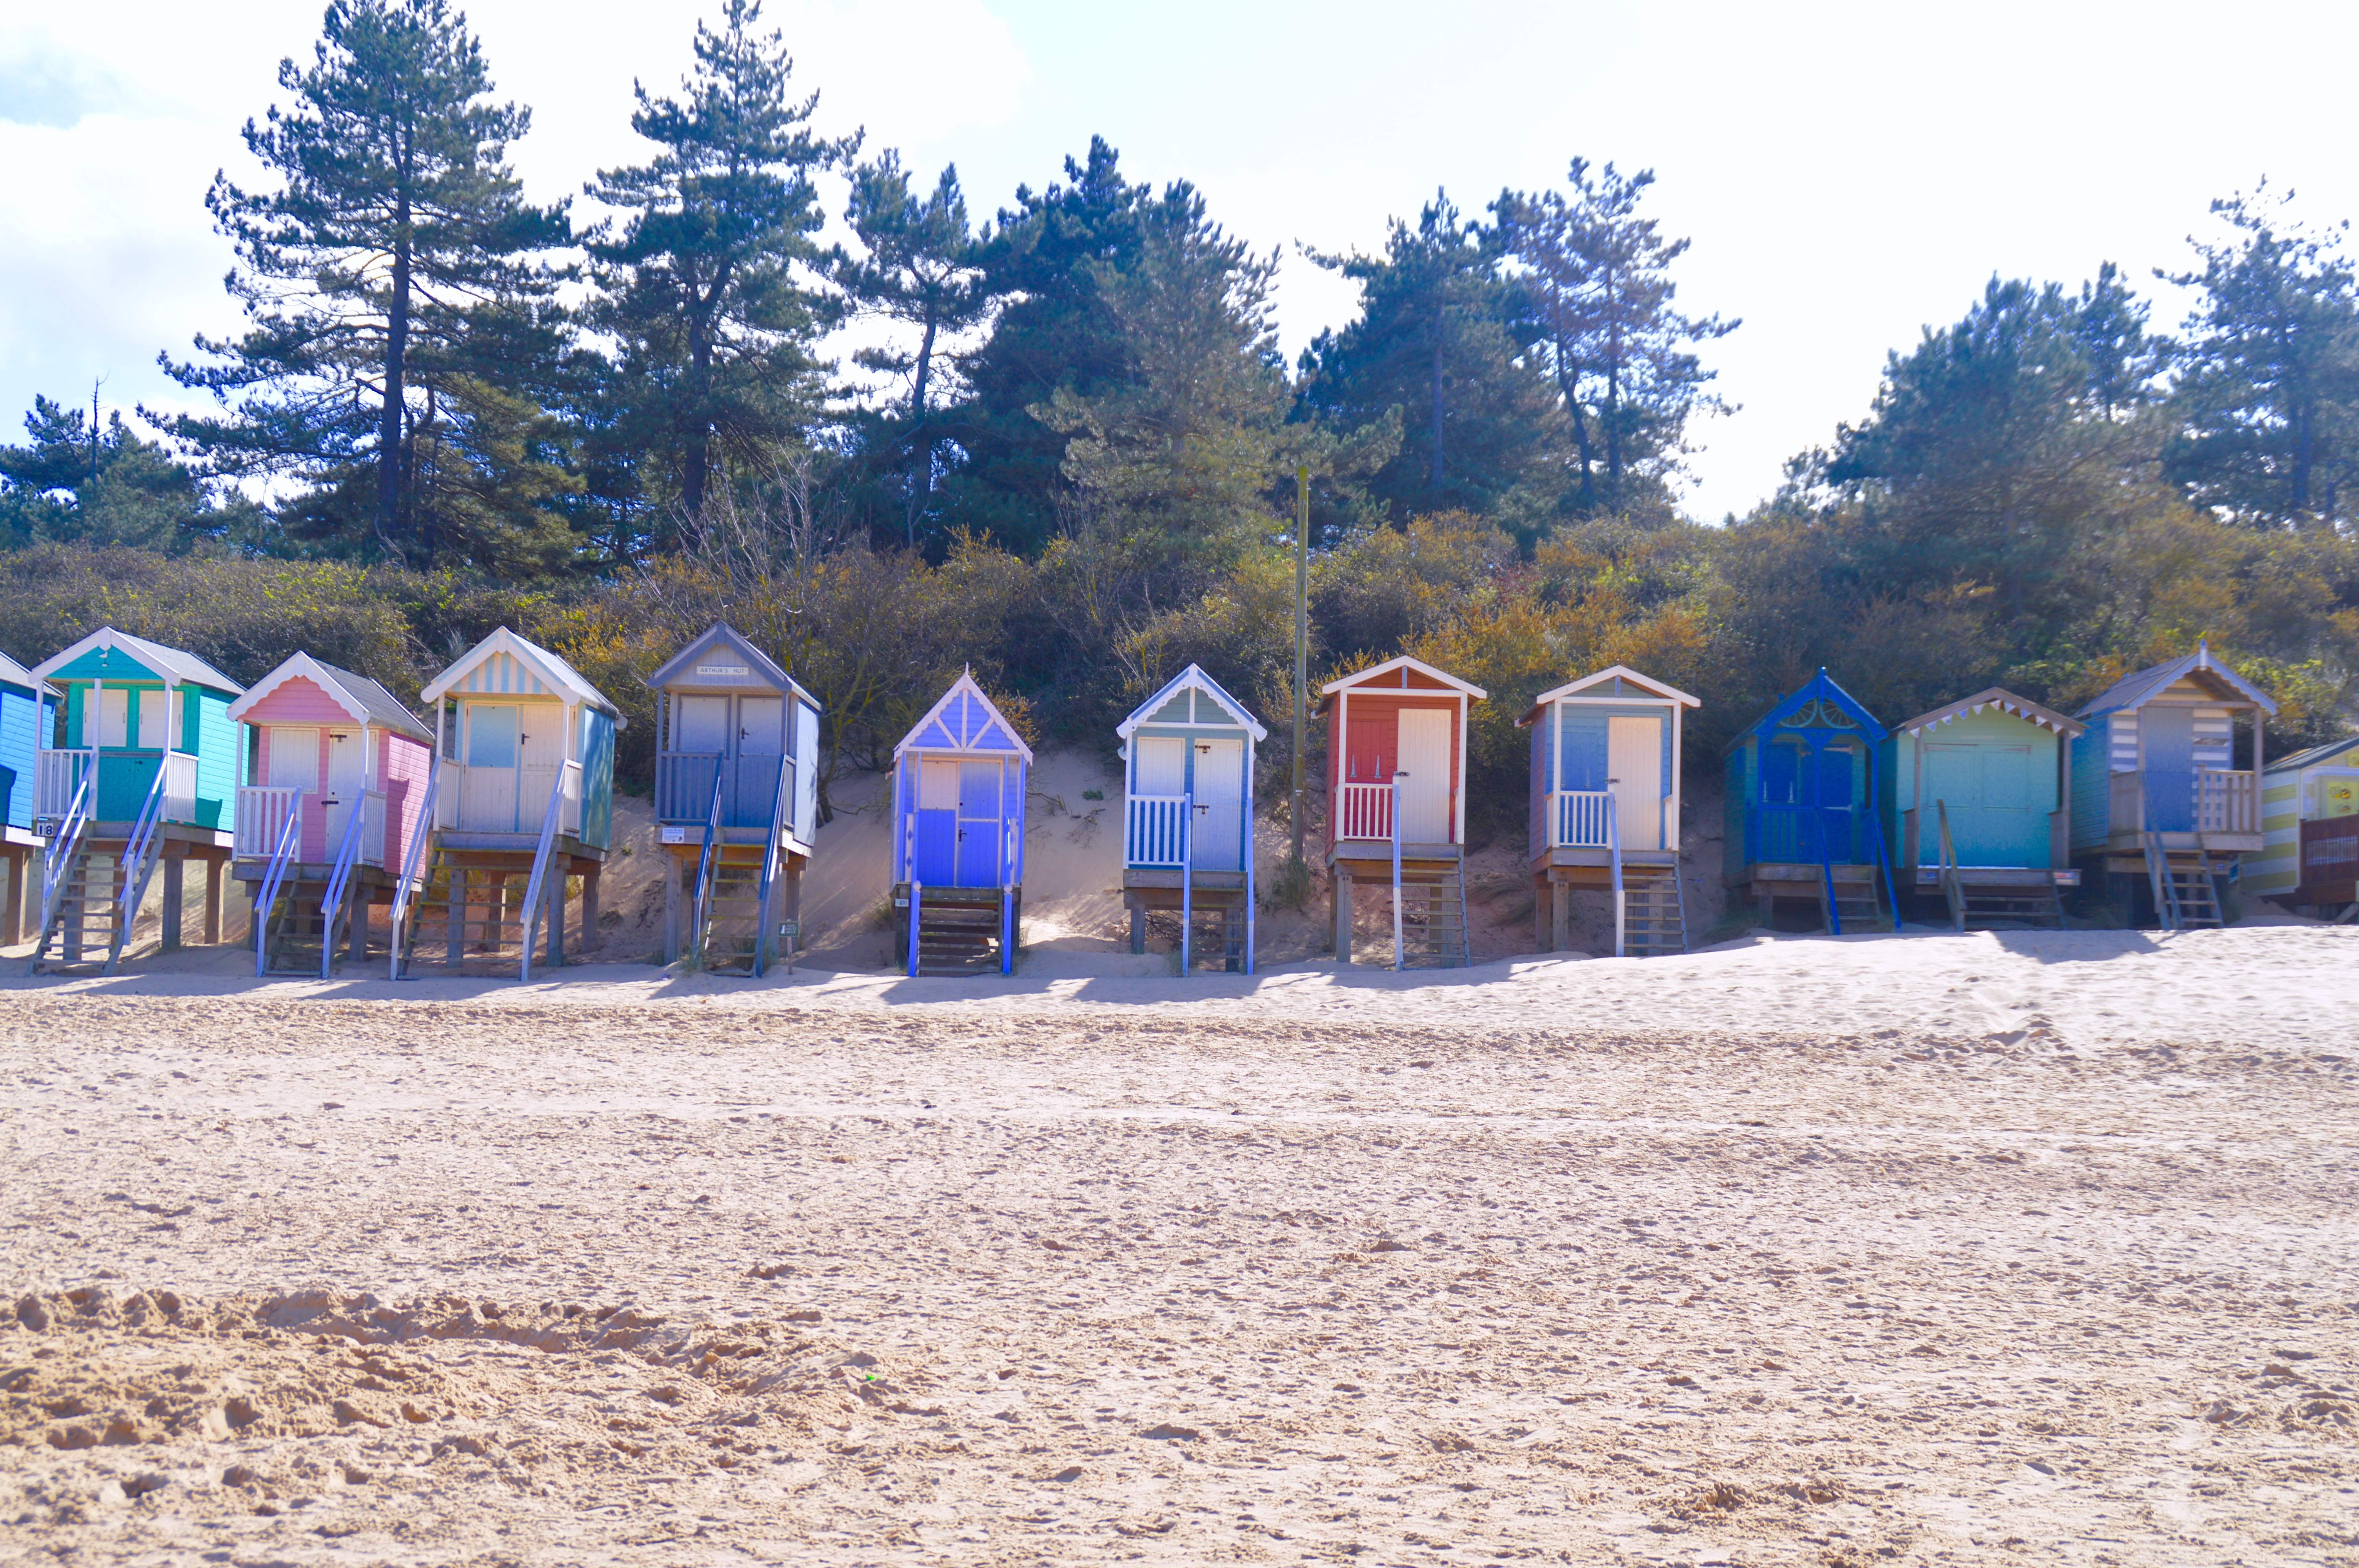 A selection of the attractively decorated beach huts on Holkham beach